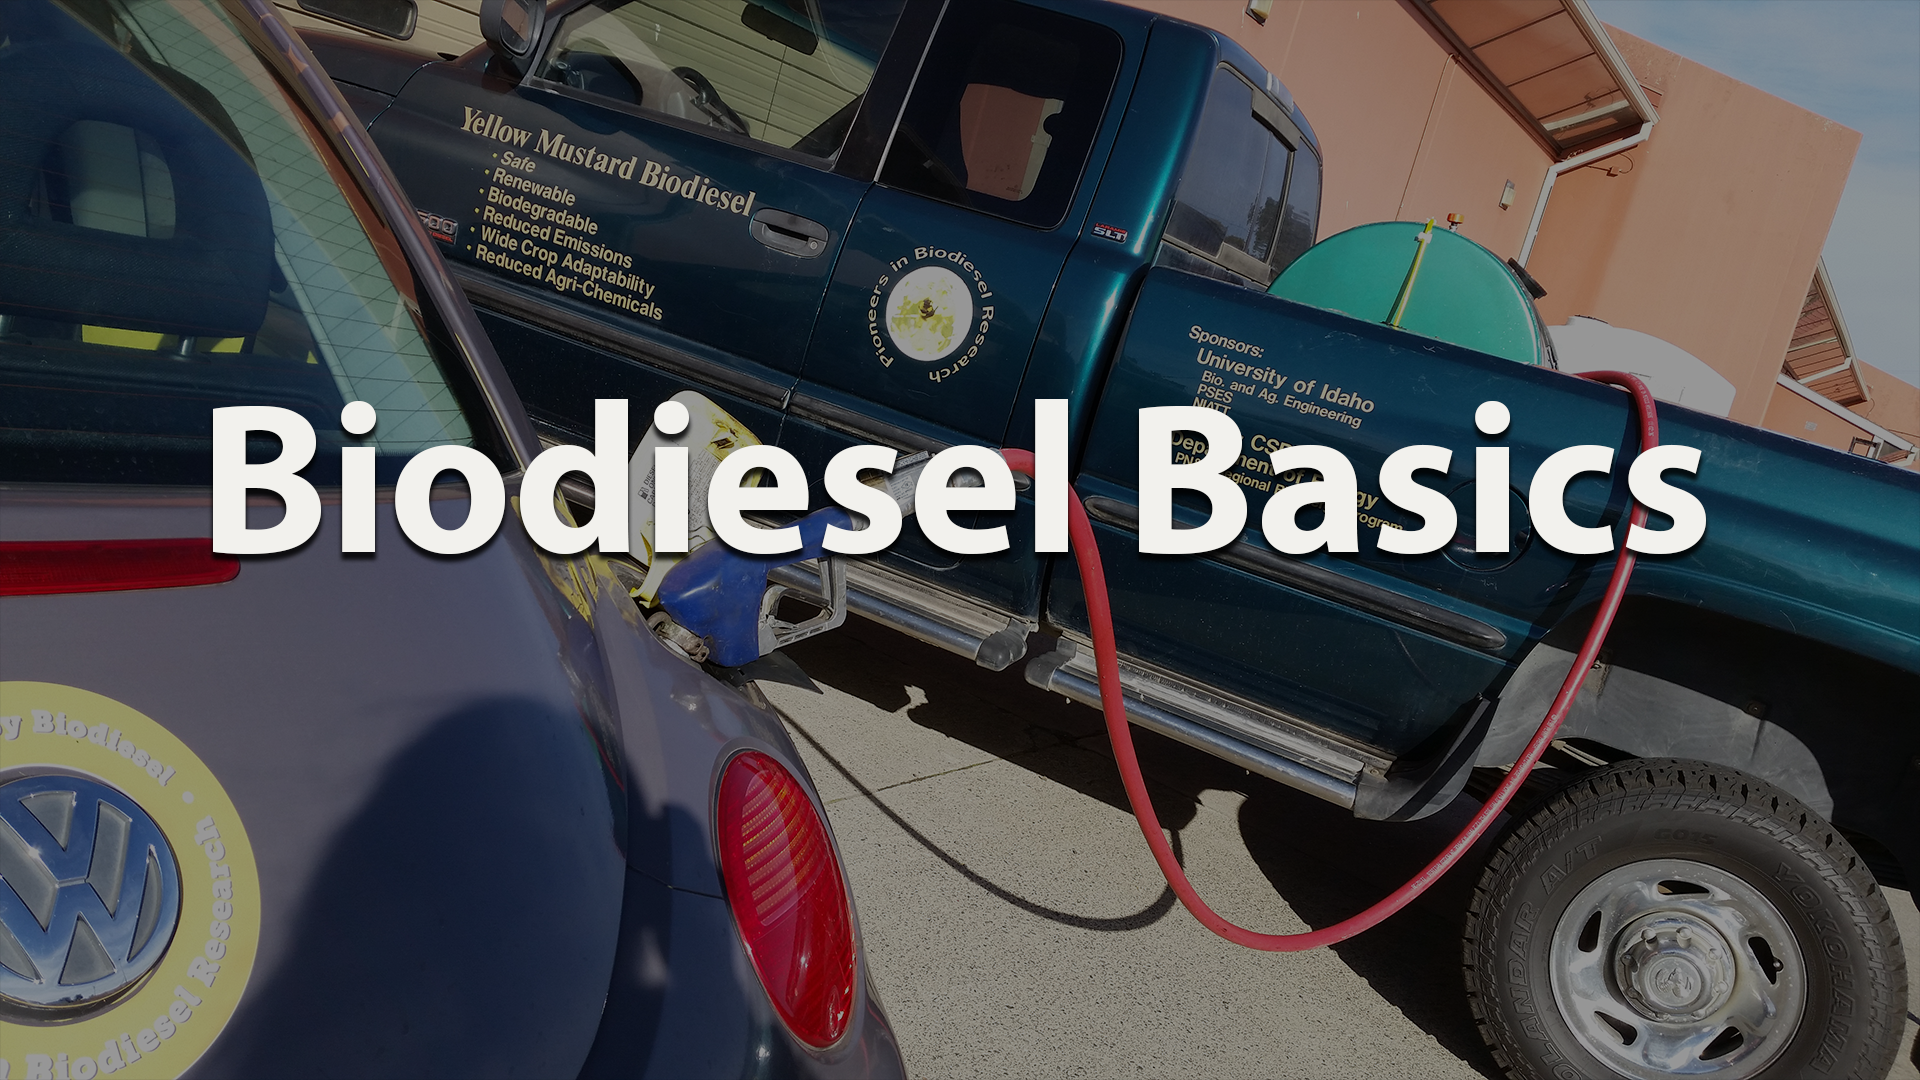 What if Biodiesel